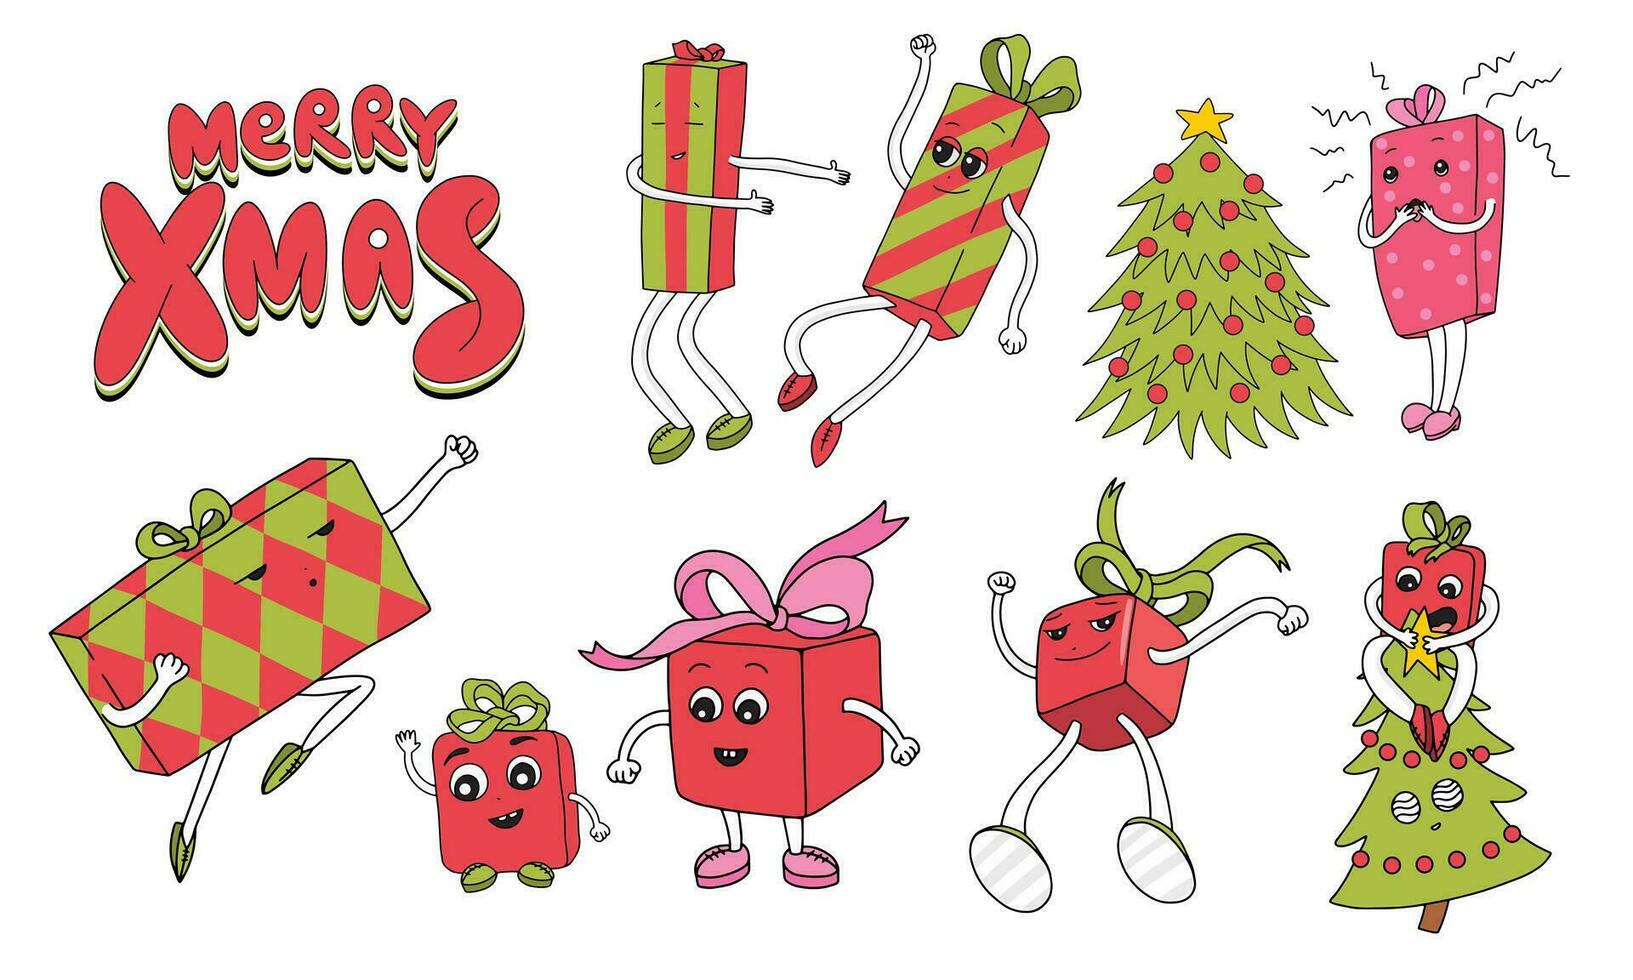 90s style Merry Christmas set with different cartoon gift boxes characters. Funny Xmas presents. Dancing and jumping christmas boxes with faces, arms and legs. Cartoon flat design vector